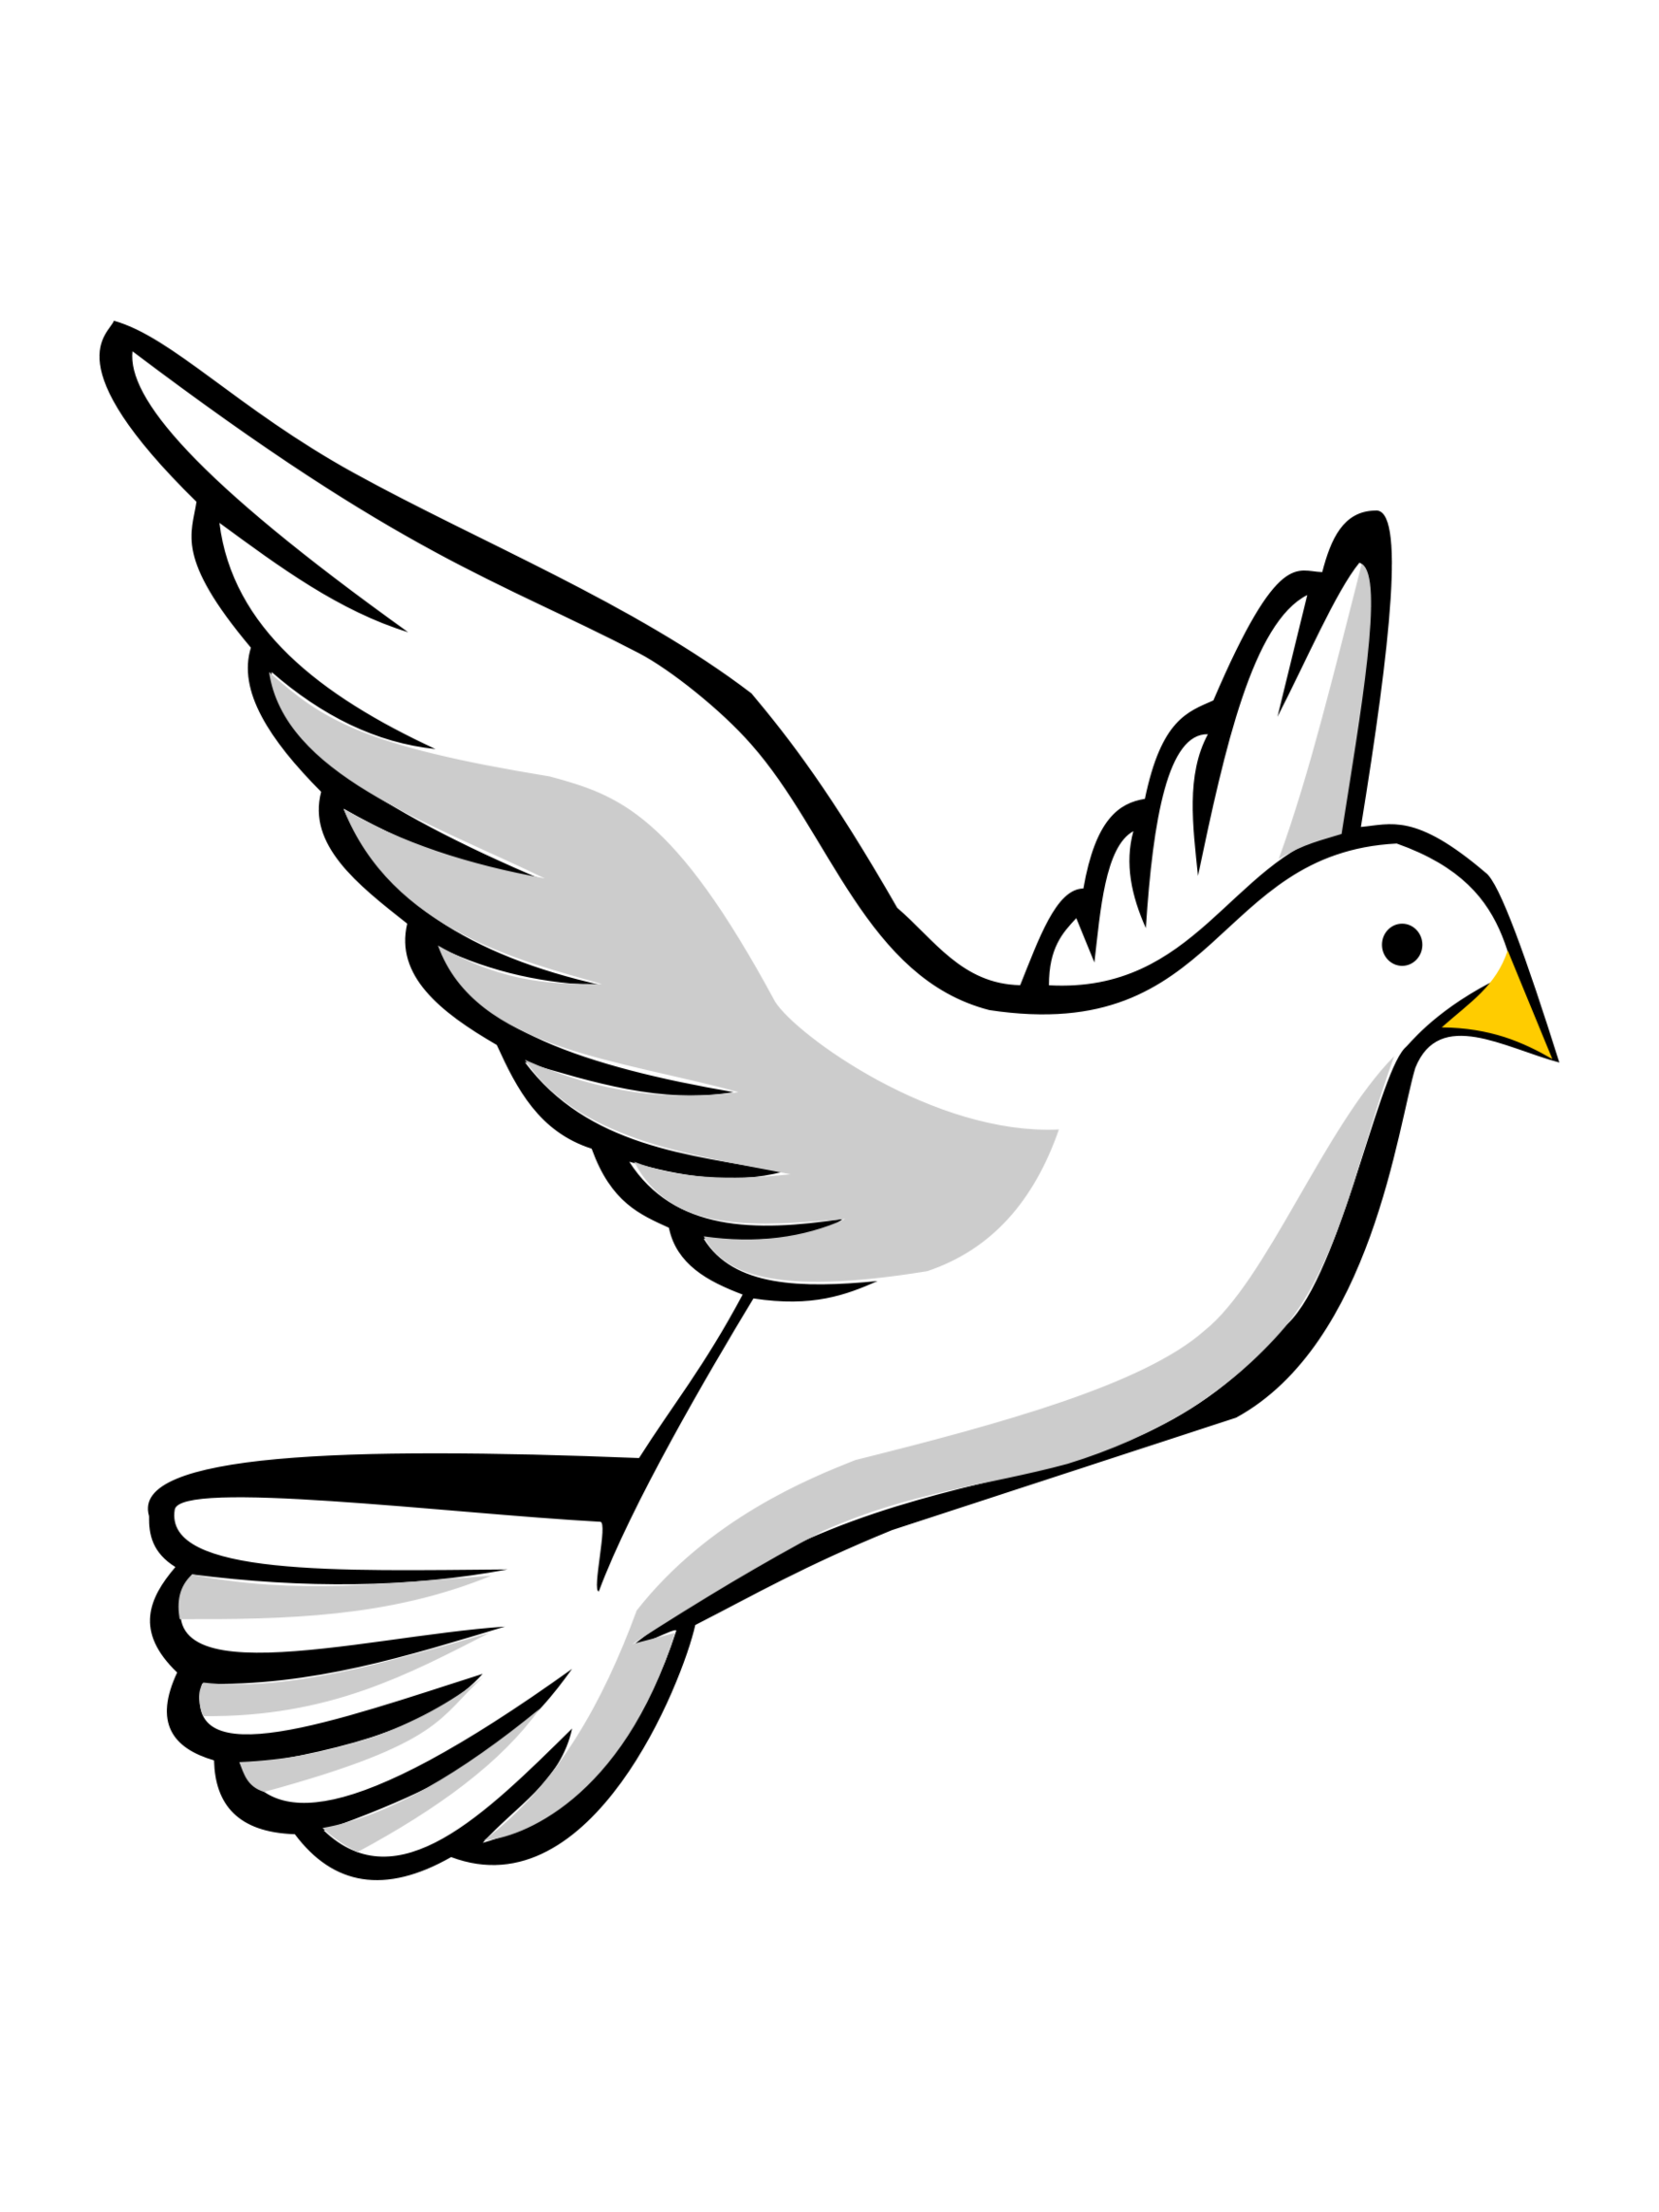 Holy Spirit Dove Drawing Clipart Panda Free Images Clipart - Free ...